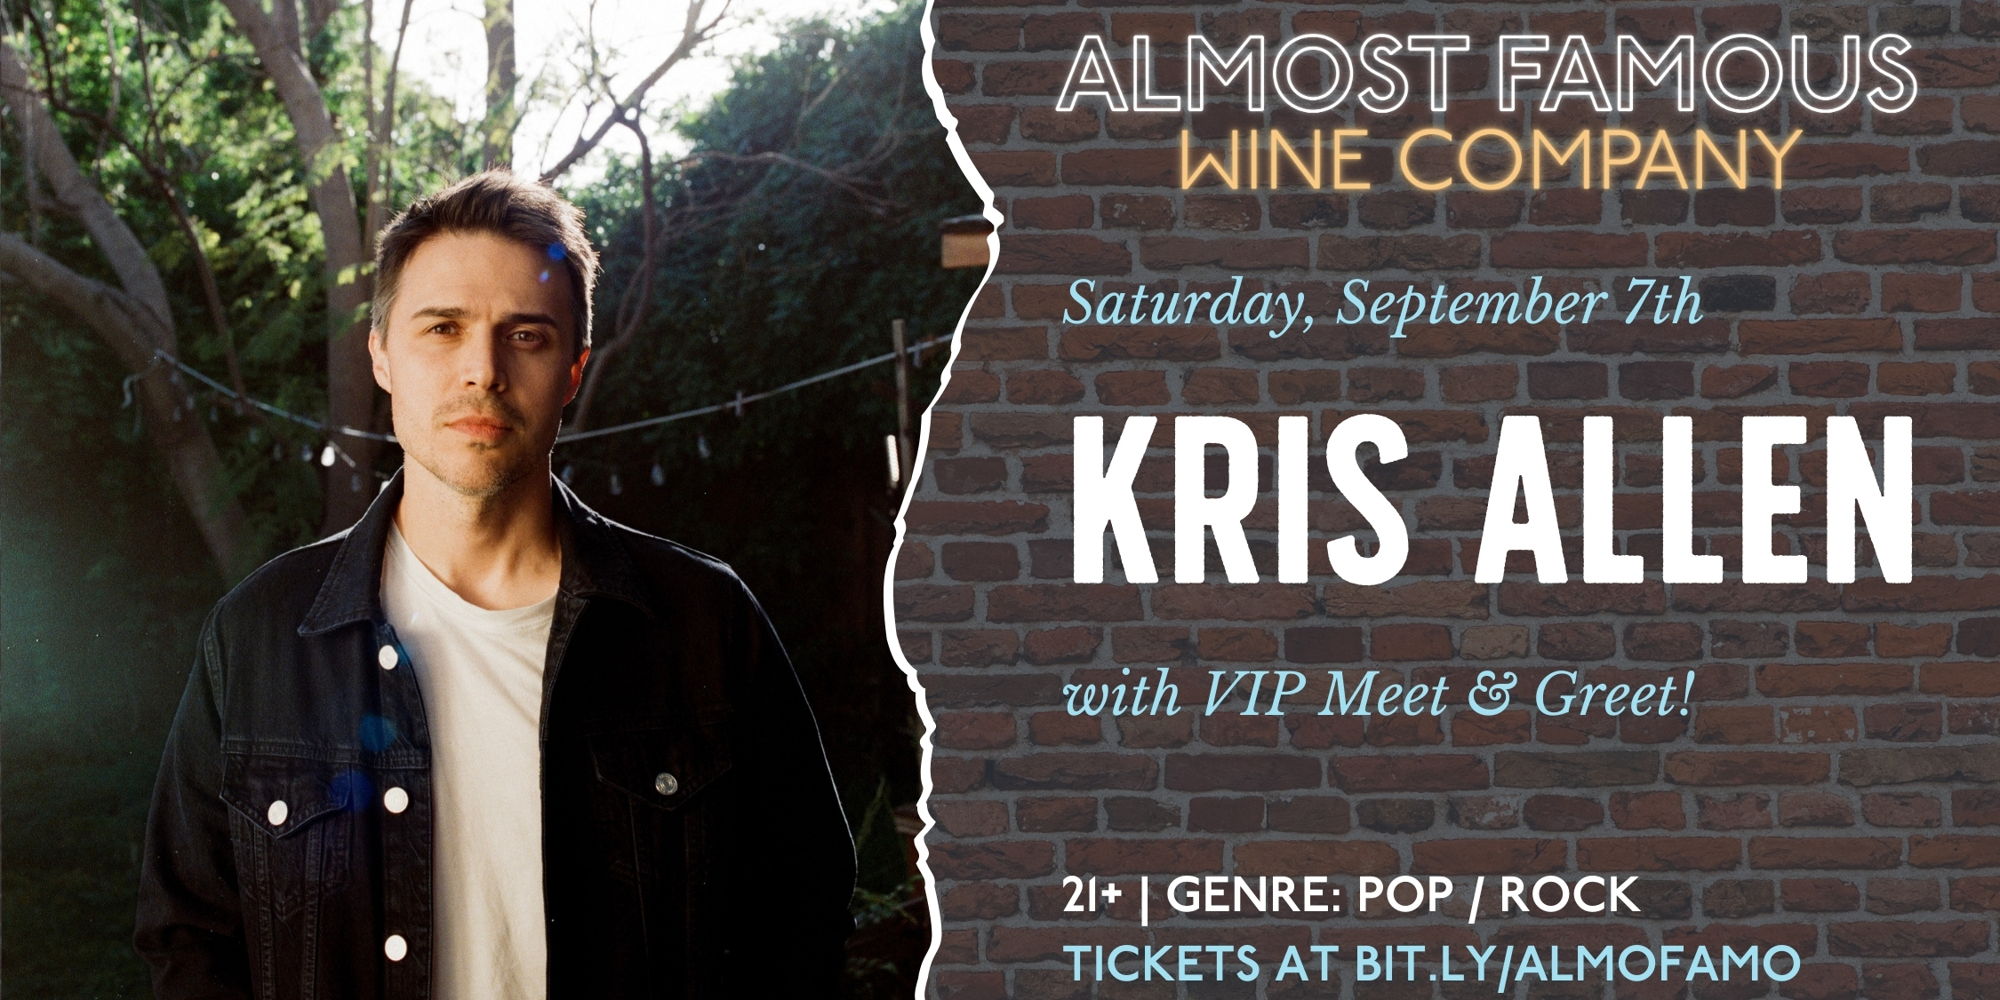 Kris Allen (“Live Like We’re Dying”) on tour with new album! promotional image